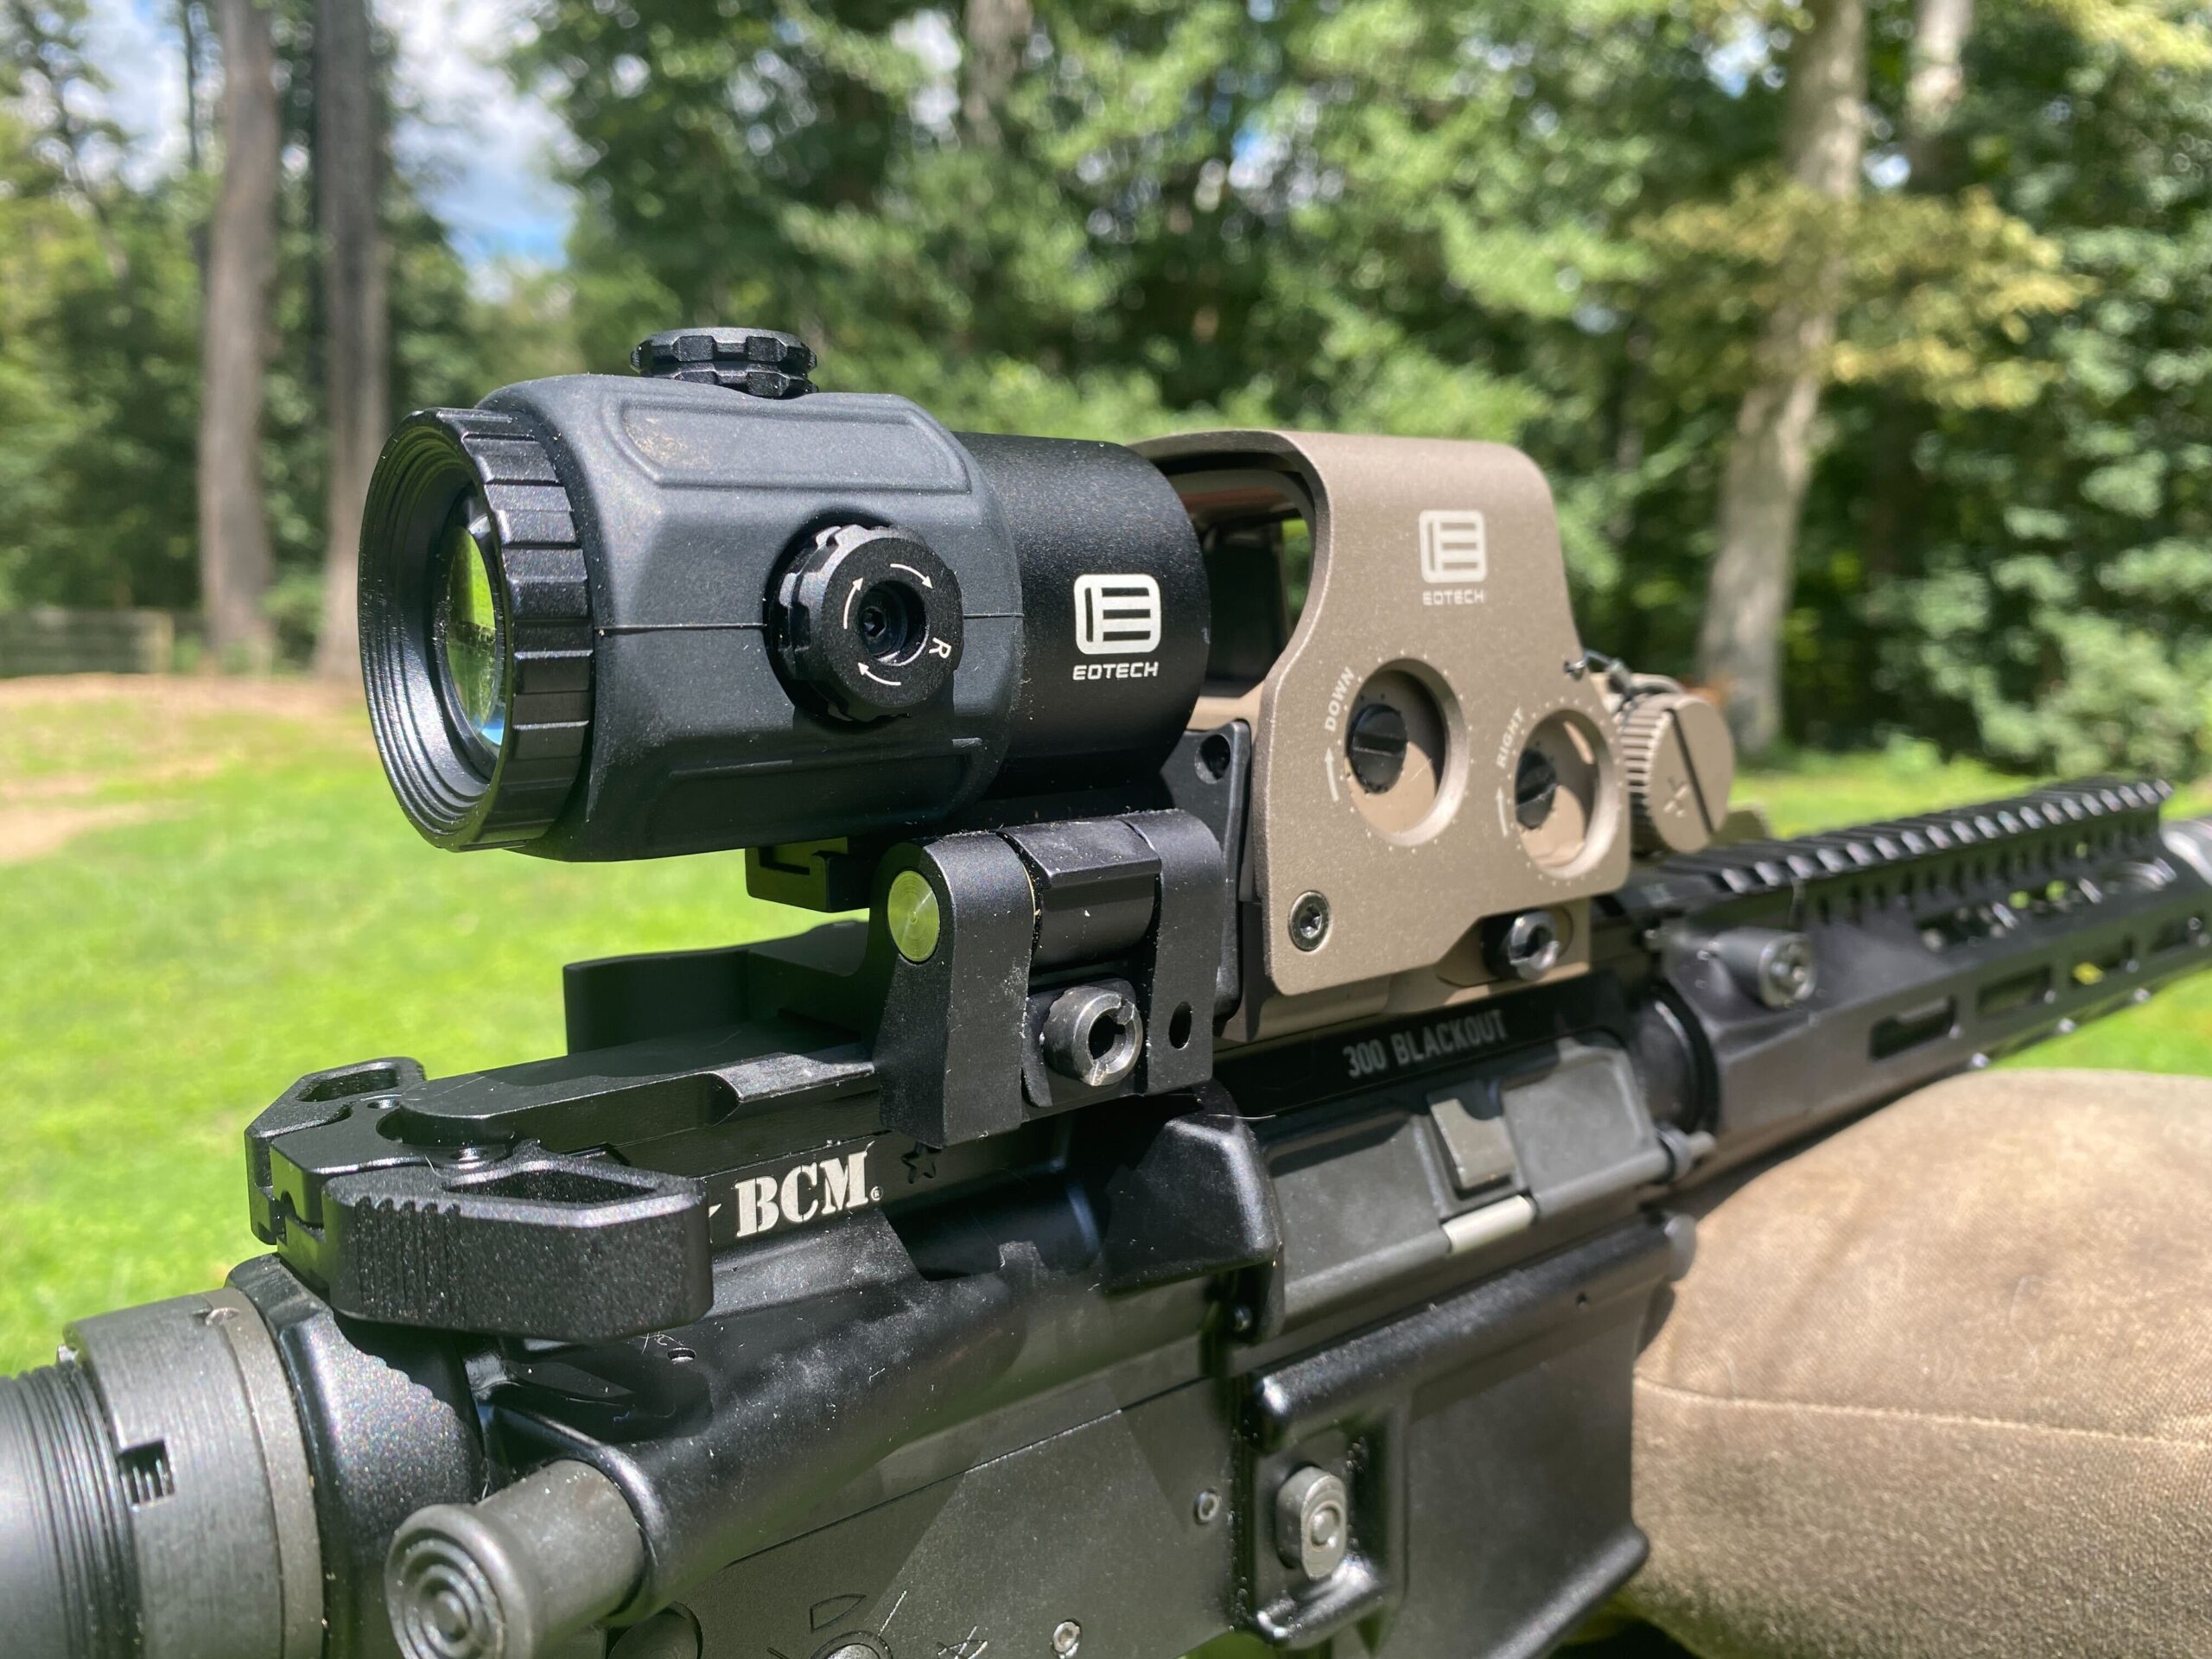 EOTECH G43 Magnifier and EXPS3 Holographic Sight